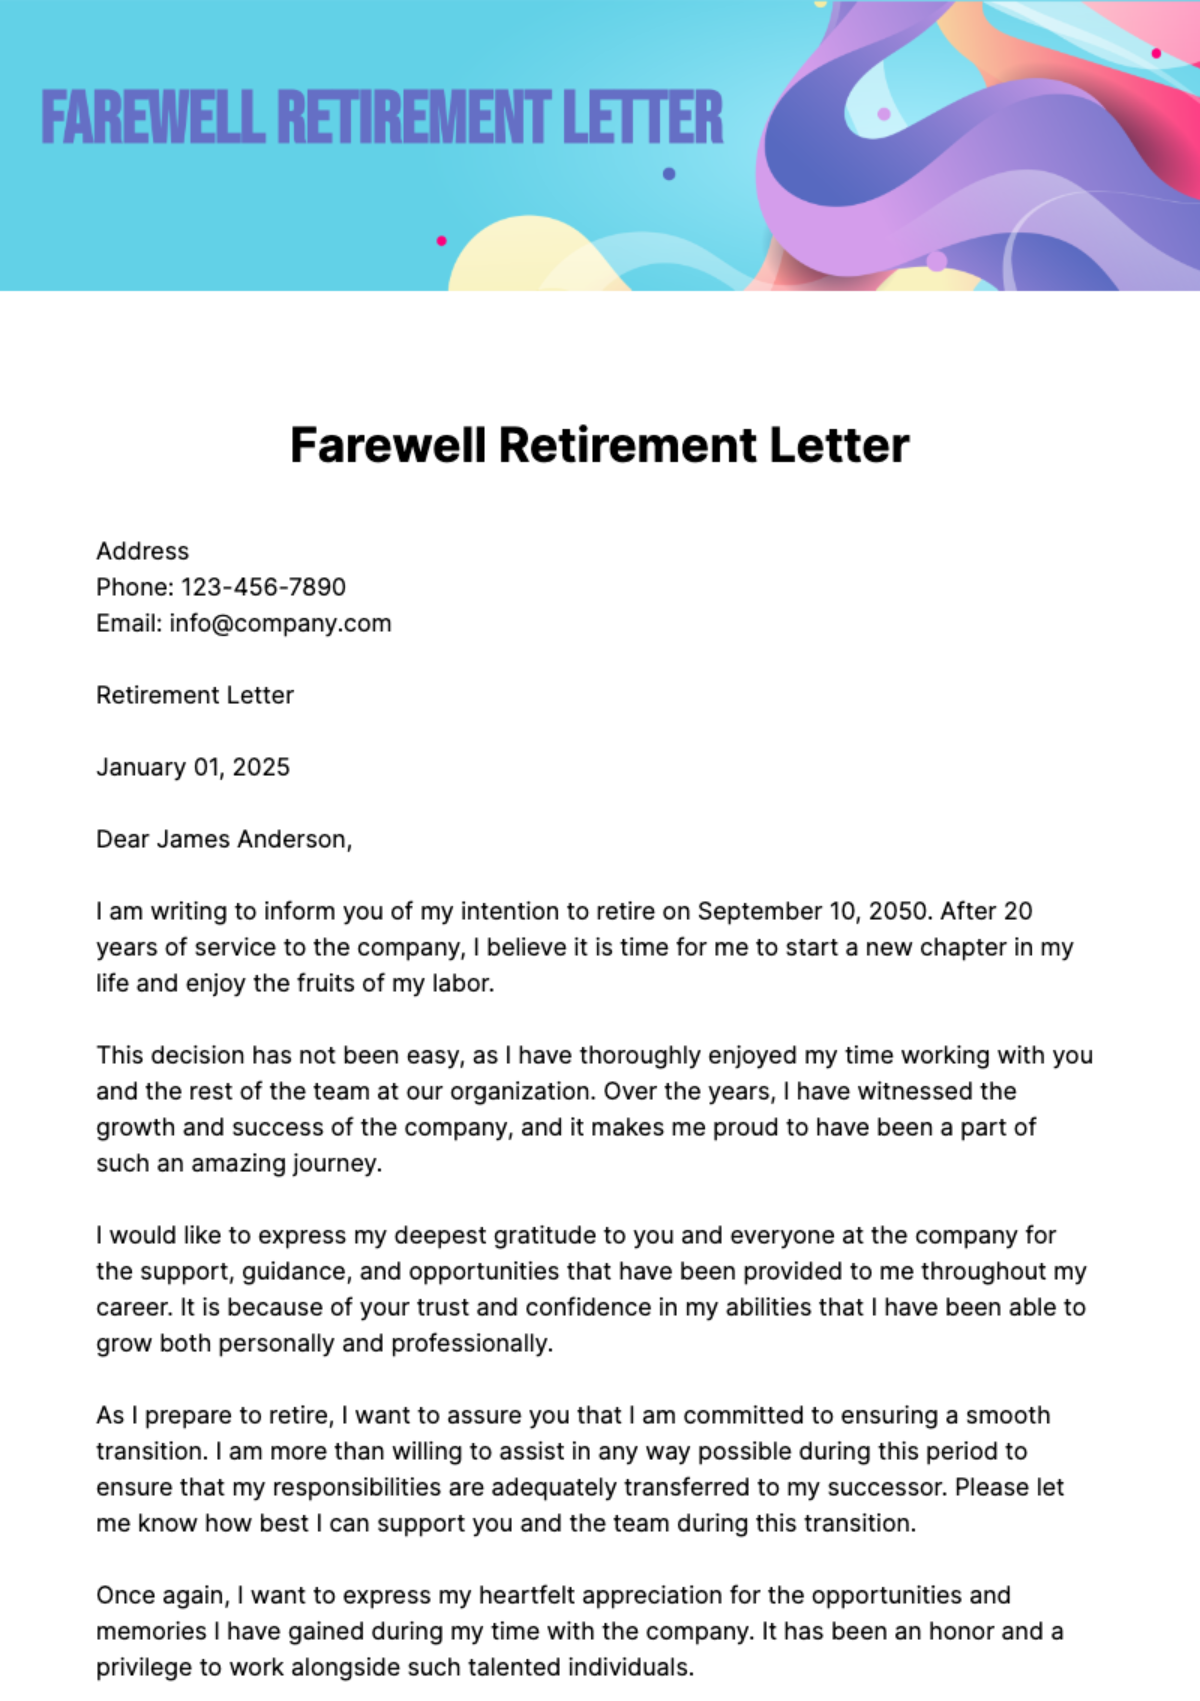 Free Farewell Retirement Letter Template